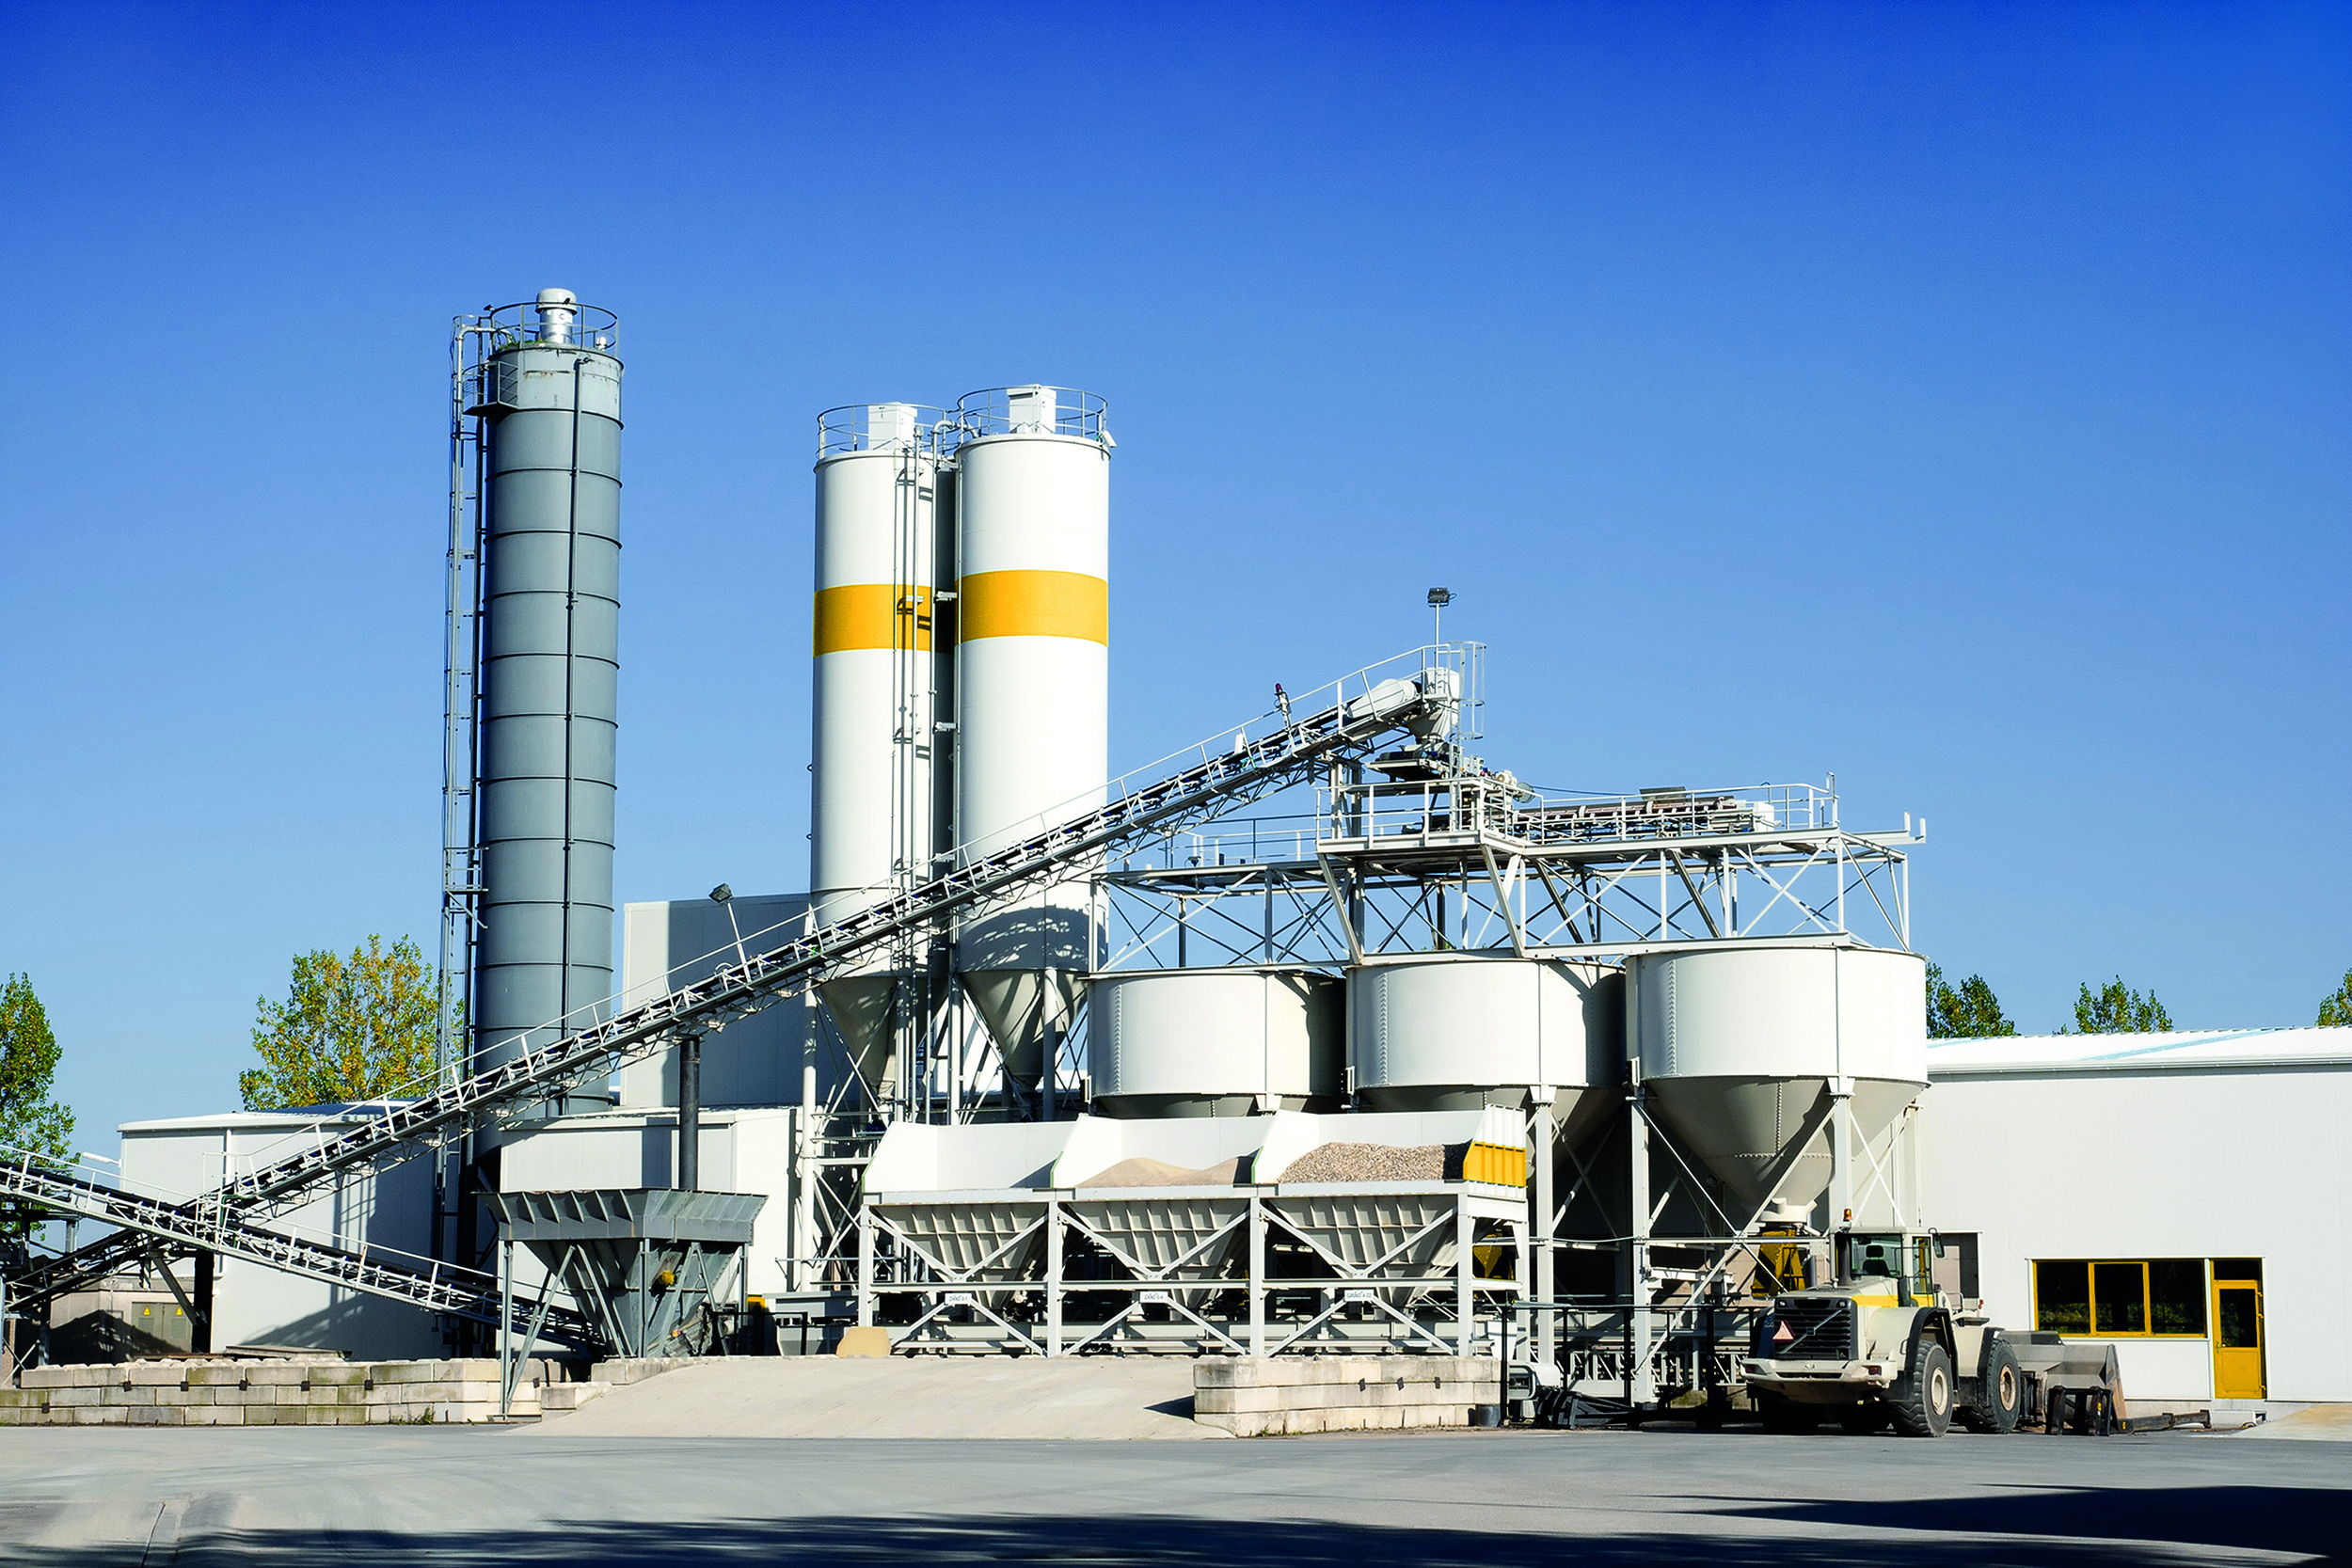 Cement factory machinery